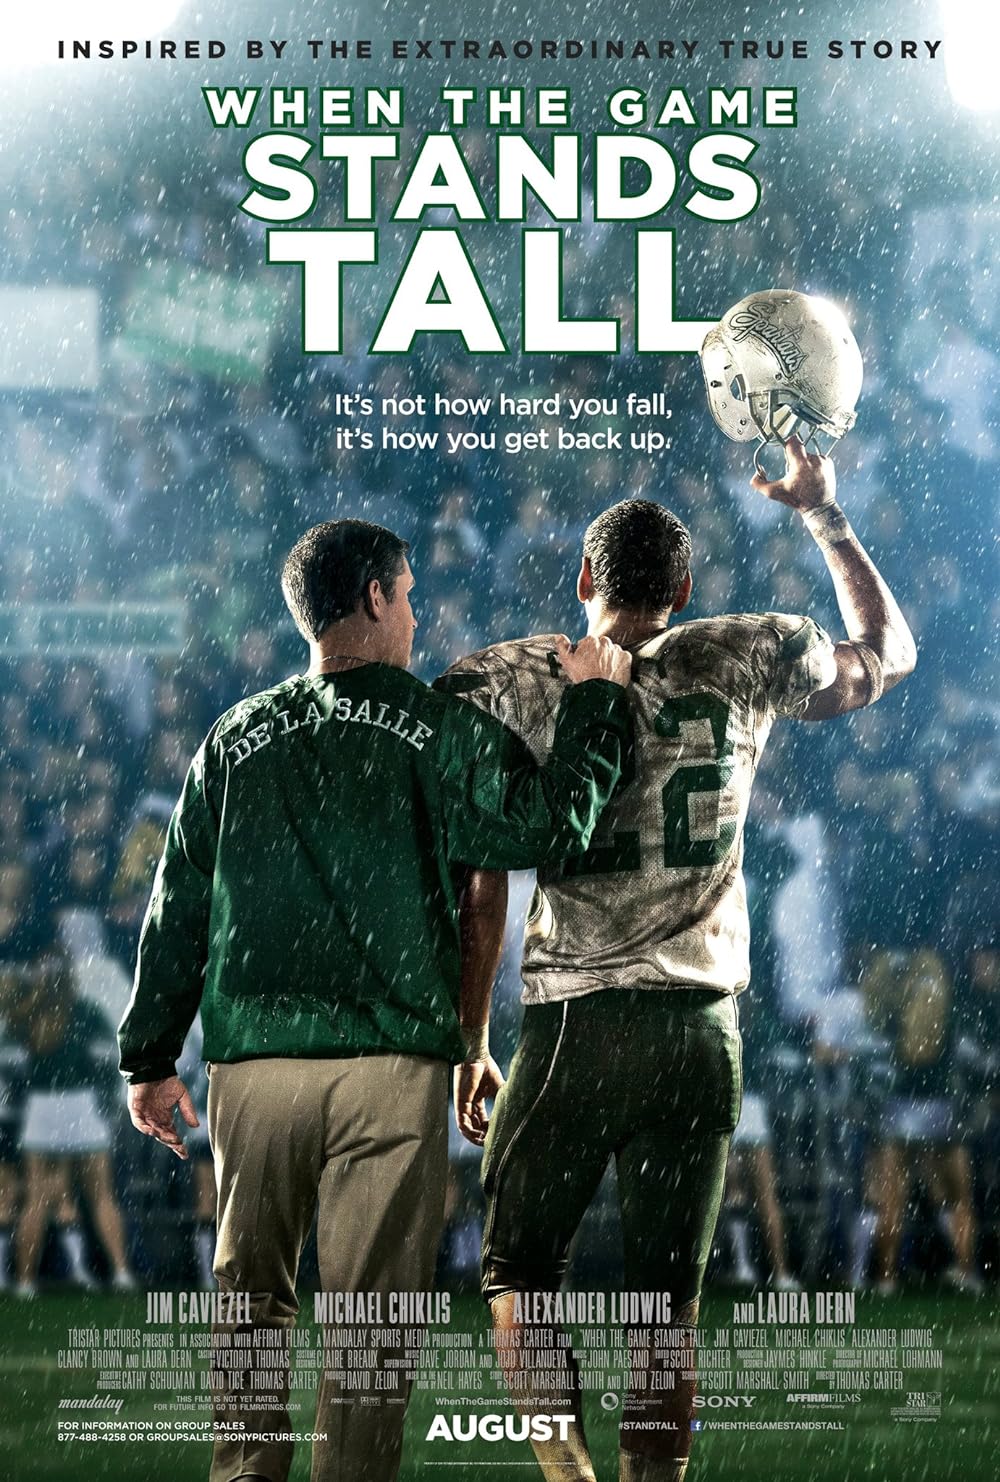 When the Game Stands Tall (2014) 384Kbps 23.976Fps 48Khz 5.1Ch DVD Turkish Audio TAC